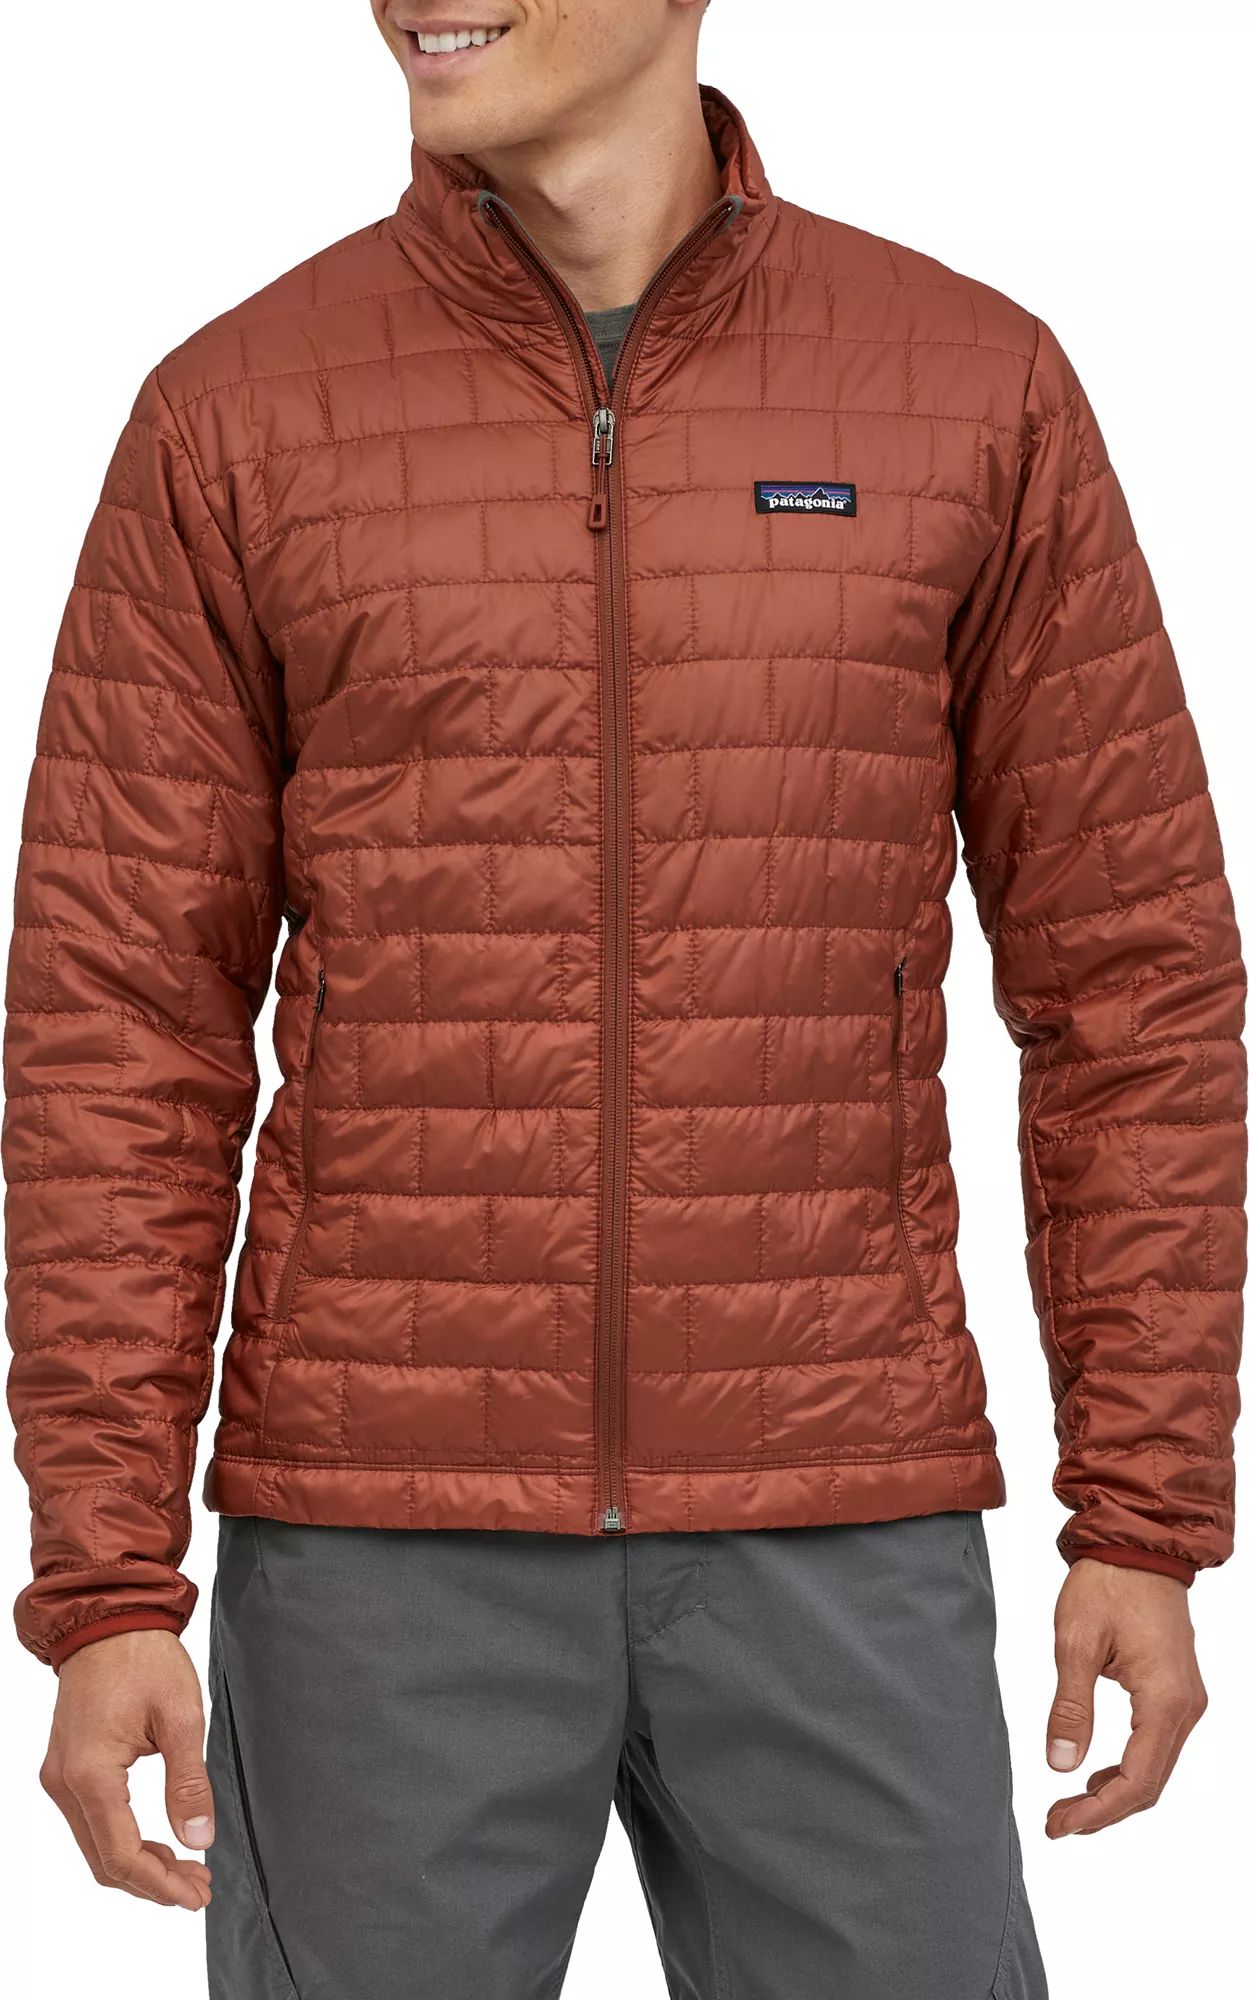 Patagonia Men's Nano Puff Jacket, Large, Barn Red | Holiday Gift | Dick's Sporting Goods